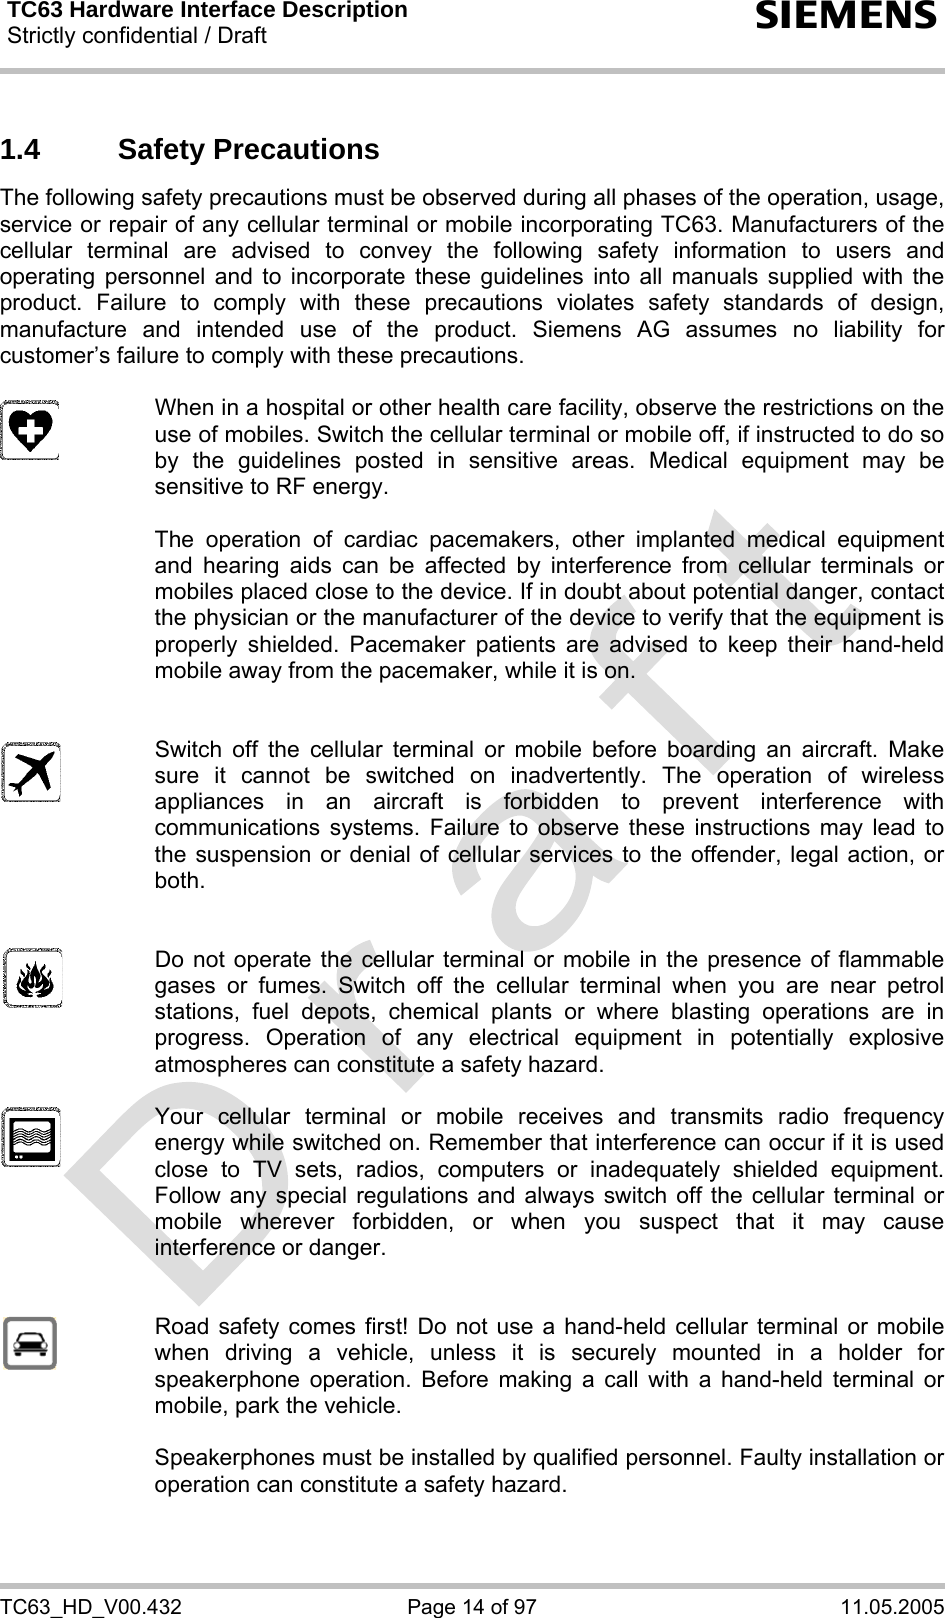 TC63 Hardware Interface Description Strictly confidential / Draft  s TC63_HD_V00.432  Page 14 of 97  11.05.2005 1.4 Safety Precautions The following safety precautions must be observed during all phases of the operation, usage, service or repair of any cellular terminal or mobile incorporating TC63. Manufacturers of the cellular terminal are advised to convey the following safety information to users and operating personnel and to incorporate these guidelines into all manuals supplied with the product. Failure to comply with these precautions violates safety standards of design, manufacture and intended use of the product. Siemens AG assumes no liability for customer’s failure to comply with these precautions.    When in a hospital or other health care facility, observe the restrictions on the use of mobiles. Switch the cellular terminal or mobile off, if instructed to do so by the guidelines posted in sensitive areas. Medical equipment may be sensitive to RF energy.   The operation of cardiac pacemakers, other implanted medical equipment and hearing aids can be affected by interference from cellular terminals or mobiles placed close to the device. If in doubt about potential danger, contact the physician or the manufacturer of the device to verify that the equipment is properly shielded. Pacemaker patients are advised to keep their hand-held mobile away from the pacemaker, while it is on.      Switch off the cellular terminal or mobile before boarding an aircraft. Make sure it cannot be switched on inadvertently. The operation of wireless appliances in an aircraft is forbidden to prevent interference with communications systems. Failure to observe these instructions may lead to the suspension or denial of cellular services to the offender, legal action, or both.     Do not operate the cellular terminal or mobile in the presence of flammable gases or fumes. Switch off the cellular terminal when you are near petrol stations, fuel depots, chemical plants or where blasting operations are in progress. Operation of any electrical equipment in potentially explosive atmospheres can constitute a safety hazard.    Your cellular terminal or mobile receives and transmits radio frequency energy while switched on. Remember that interference can occur if it is used close to TV sets, radios, computers or inadequately shielded equipment. Follow any special regulations and always switch off the cellular terminal or mobile wherever forbidden, or when you suspect that it may cause interference or danger.     Road safety comes first! Do not use a hand-held cellular terminal or mobile when driving a vehicle, unless it is securely mounted in a holder for speakerphone operation. Before making a call with a hand-held terminal or mobile, park the vehicle.   Speakerphones must be installed by qualified personnel. Faulty installation or operation can constitute a safety hazard.  